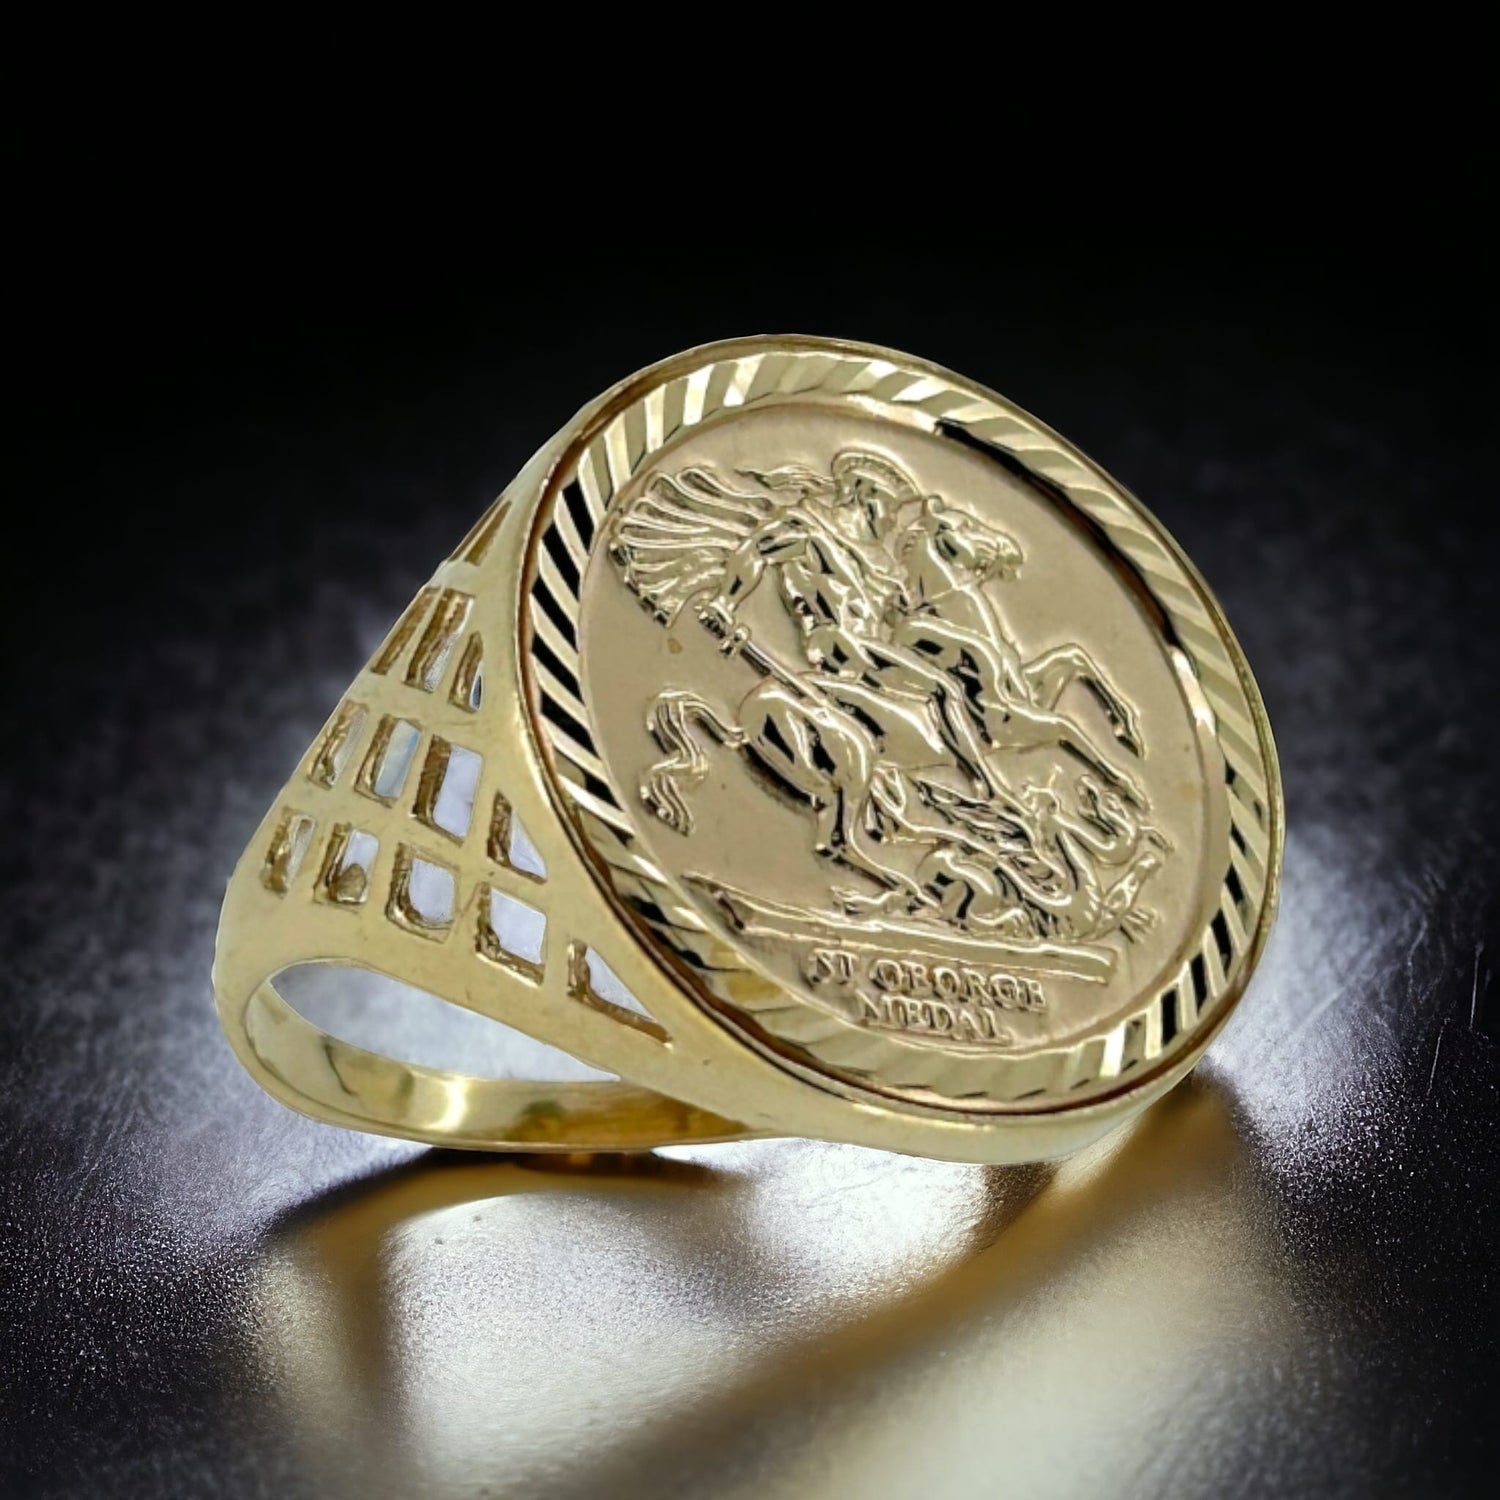 9ct gold sovereign ring on a black table